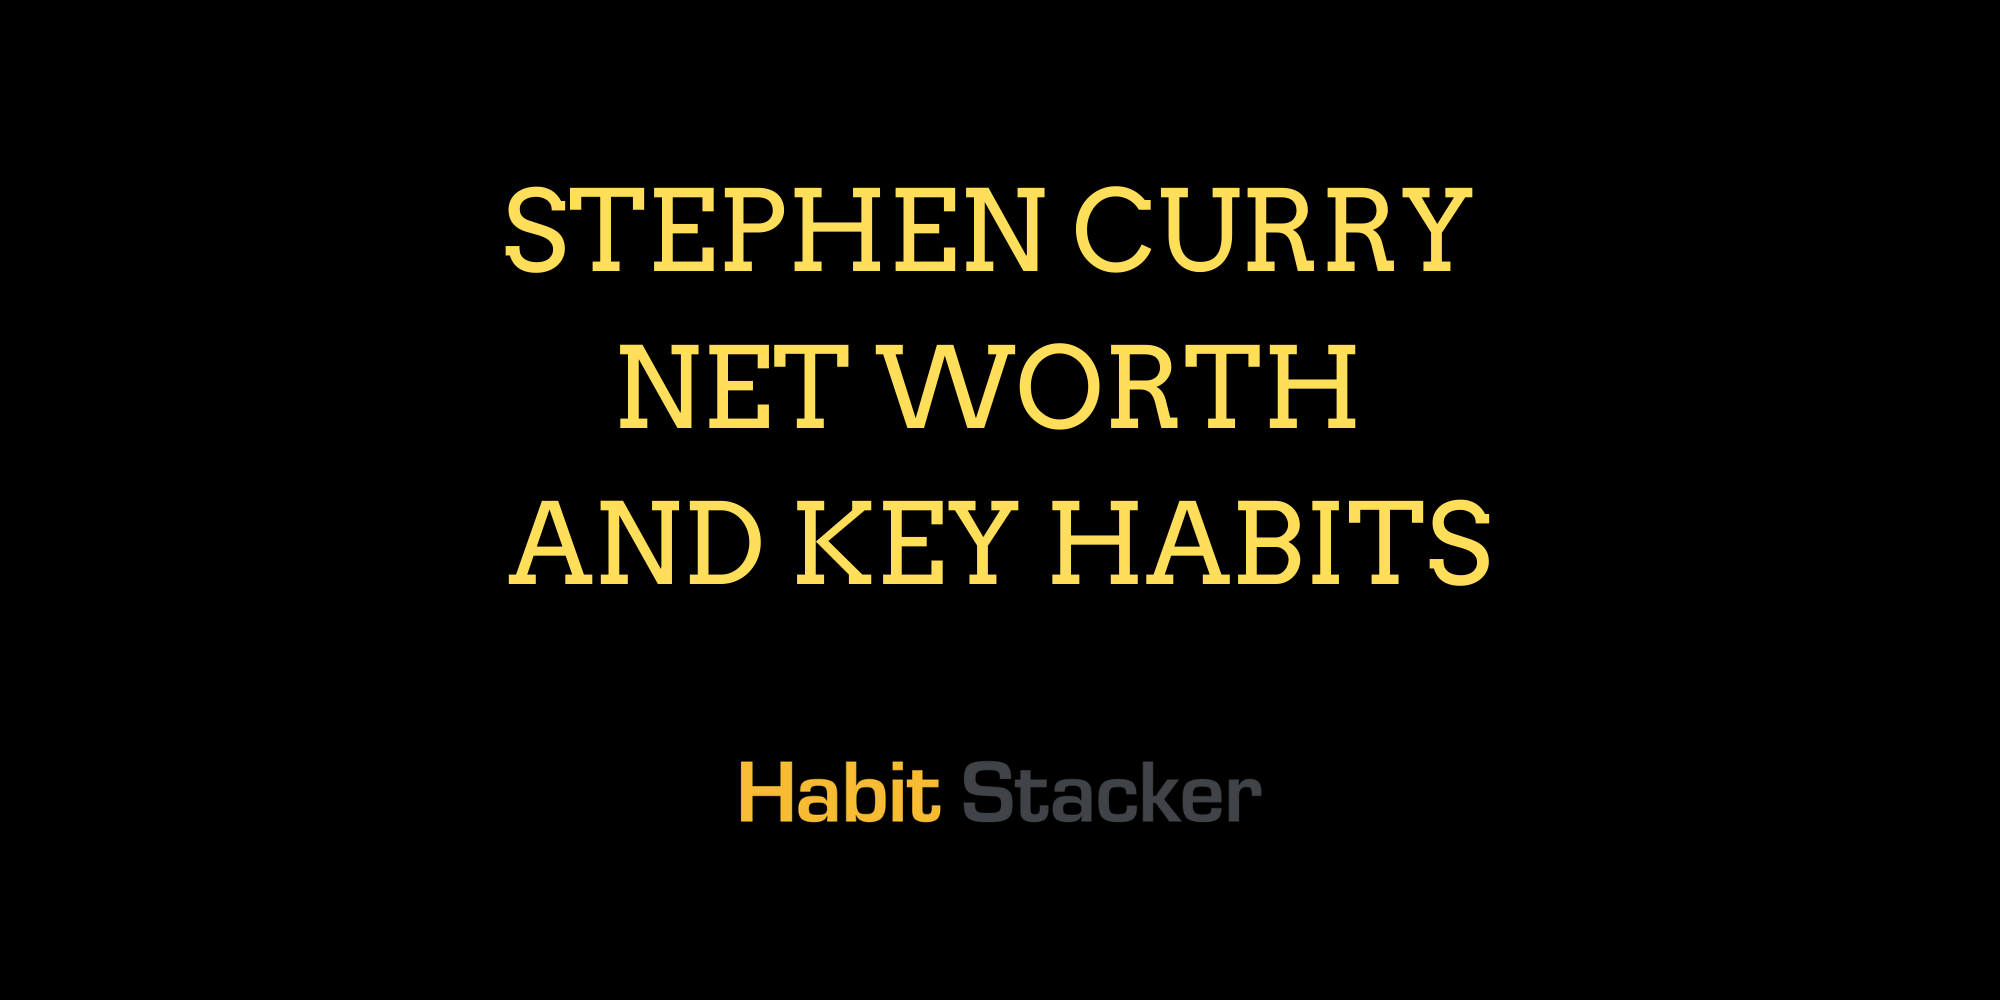 Stephen Curry Net Worth and Key Habits